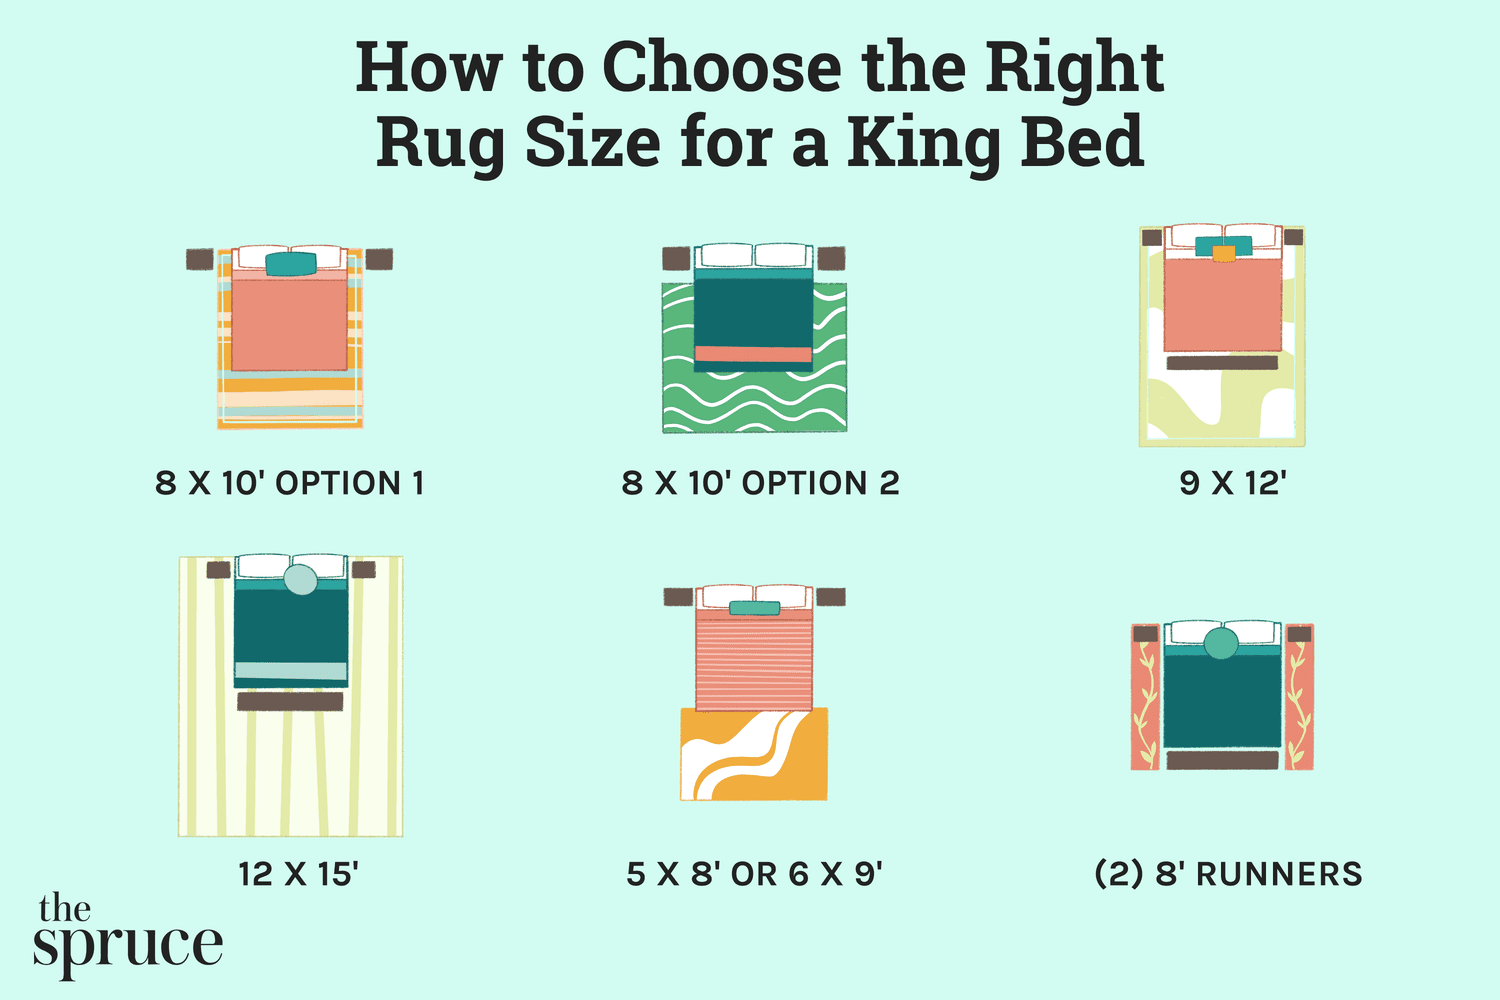 How to Choose the Right Rug Size for Under a King Bed